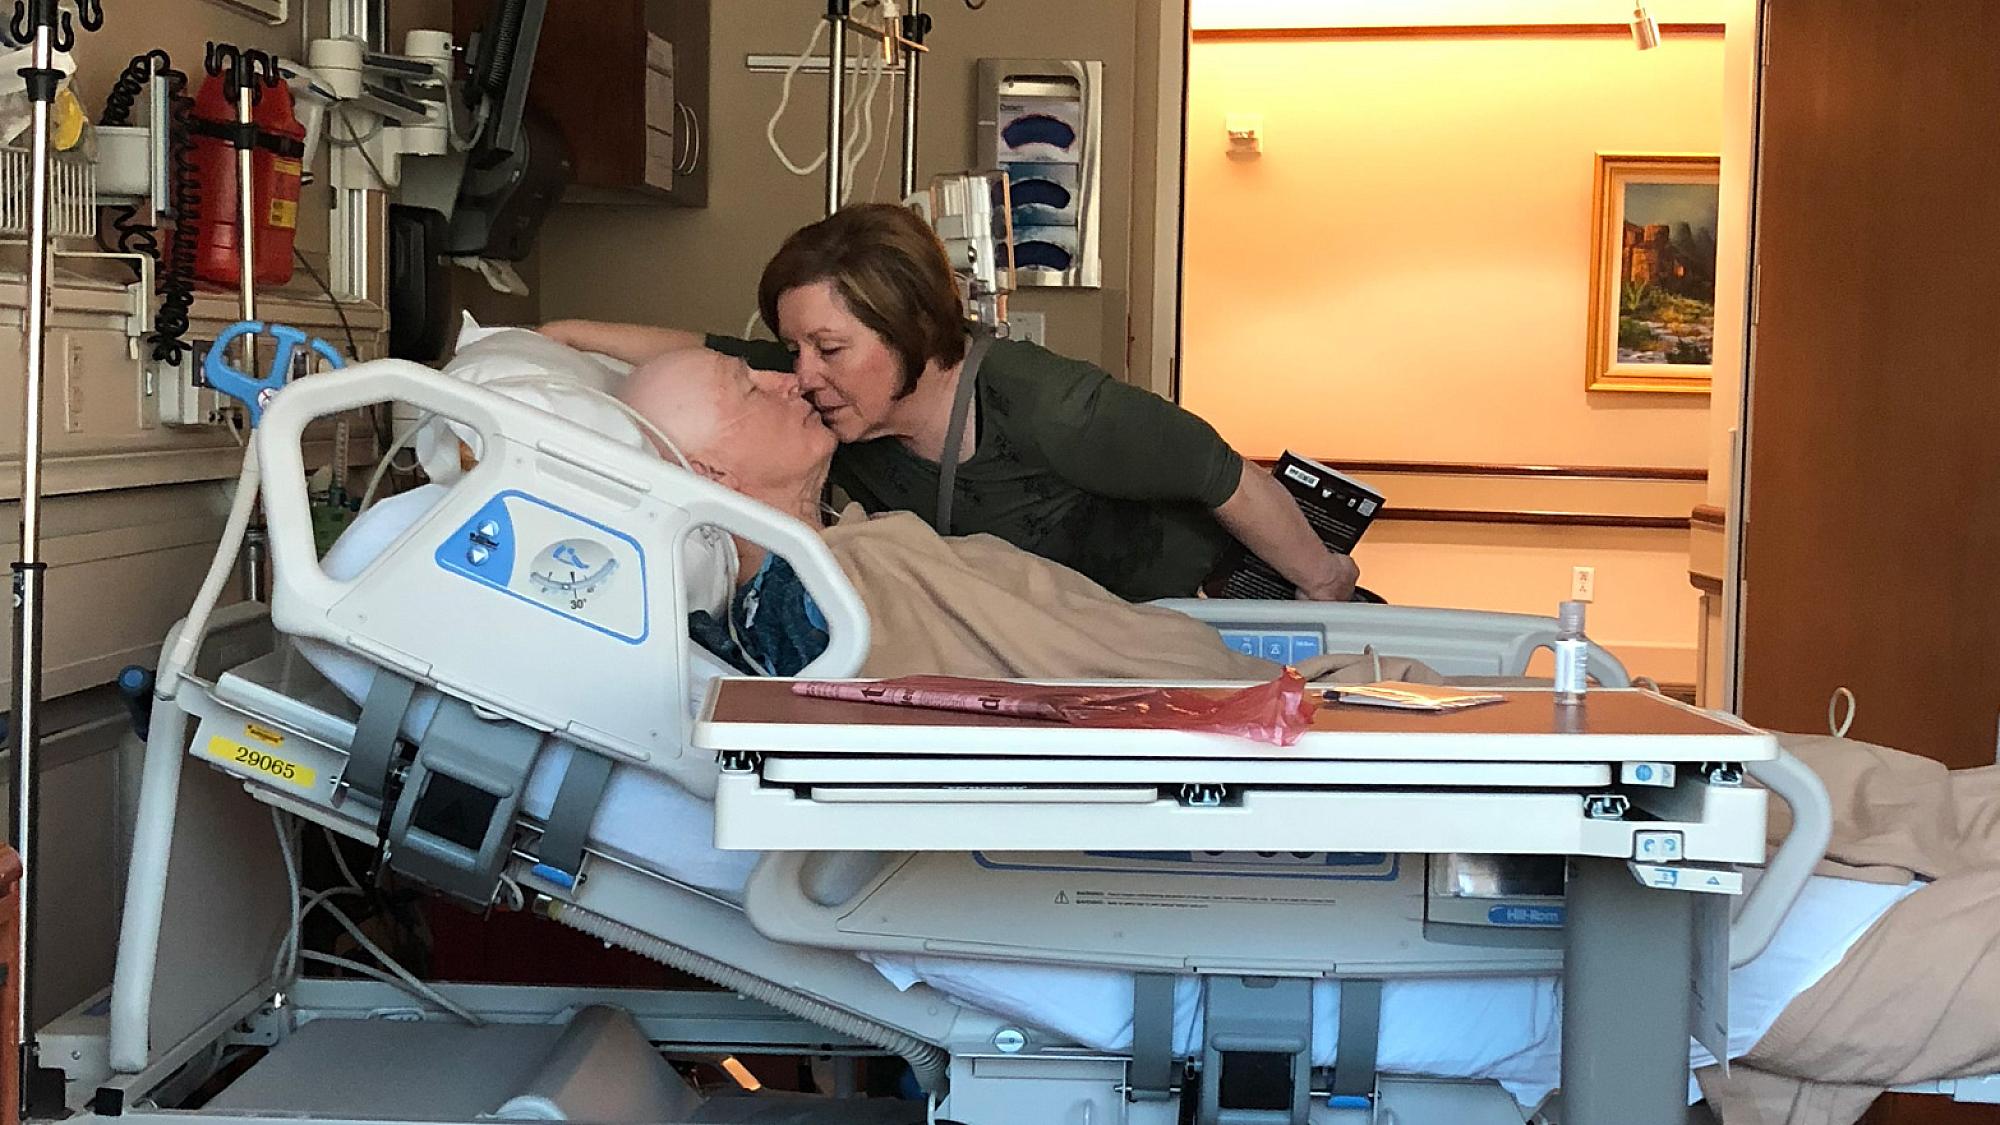 Jerry and Tad Simonson after his surgery in 2018. Jerry is lying in a hospital bed while Tad leans over to kiss him.